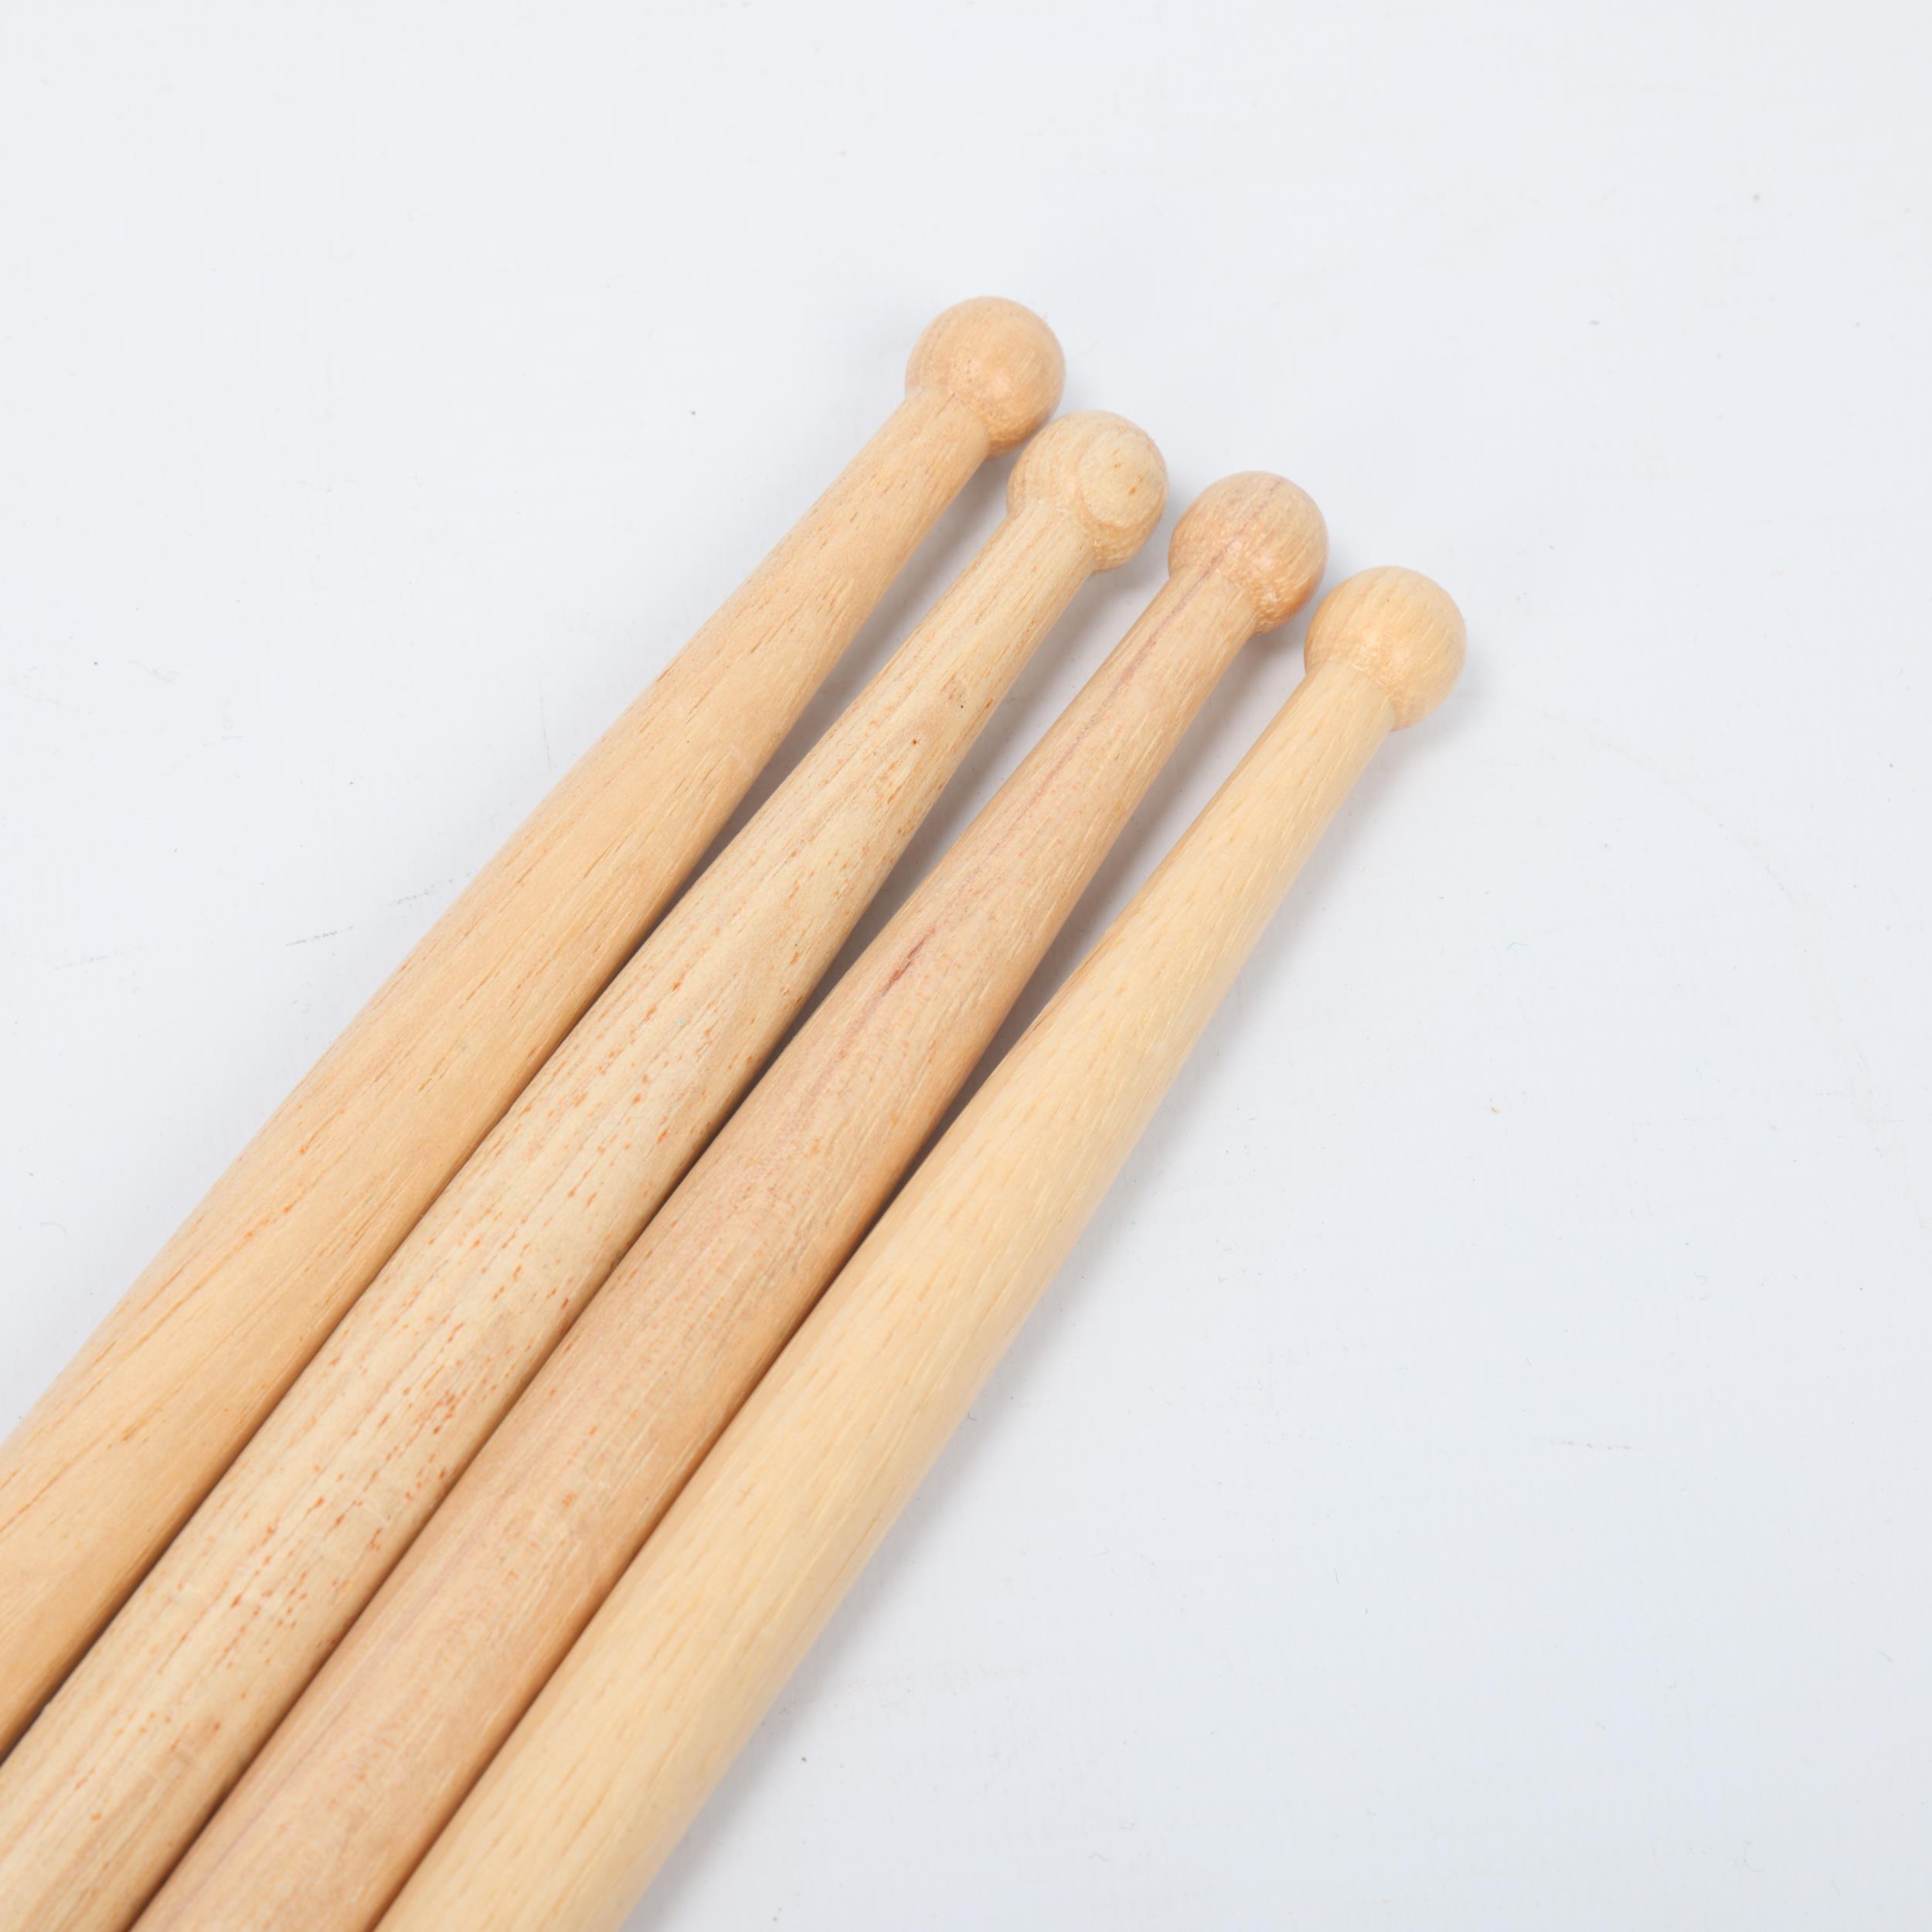 Four USED SILVERFOX LR Hickory DRUMSTICKS belonging to MITCH MITCHELL. - Image 3 of 3